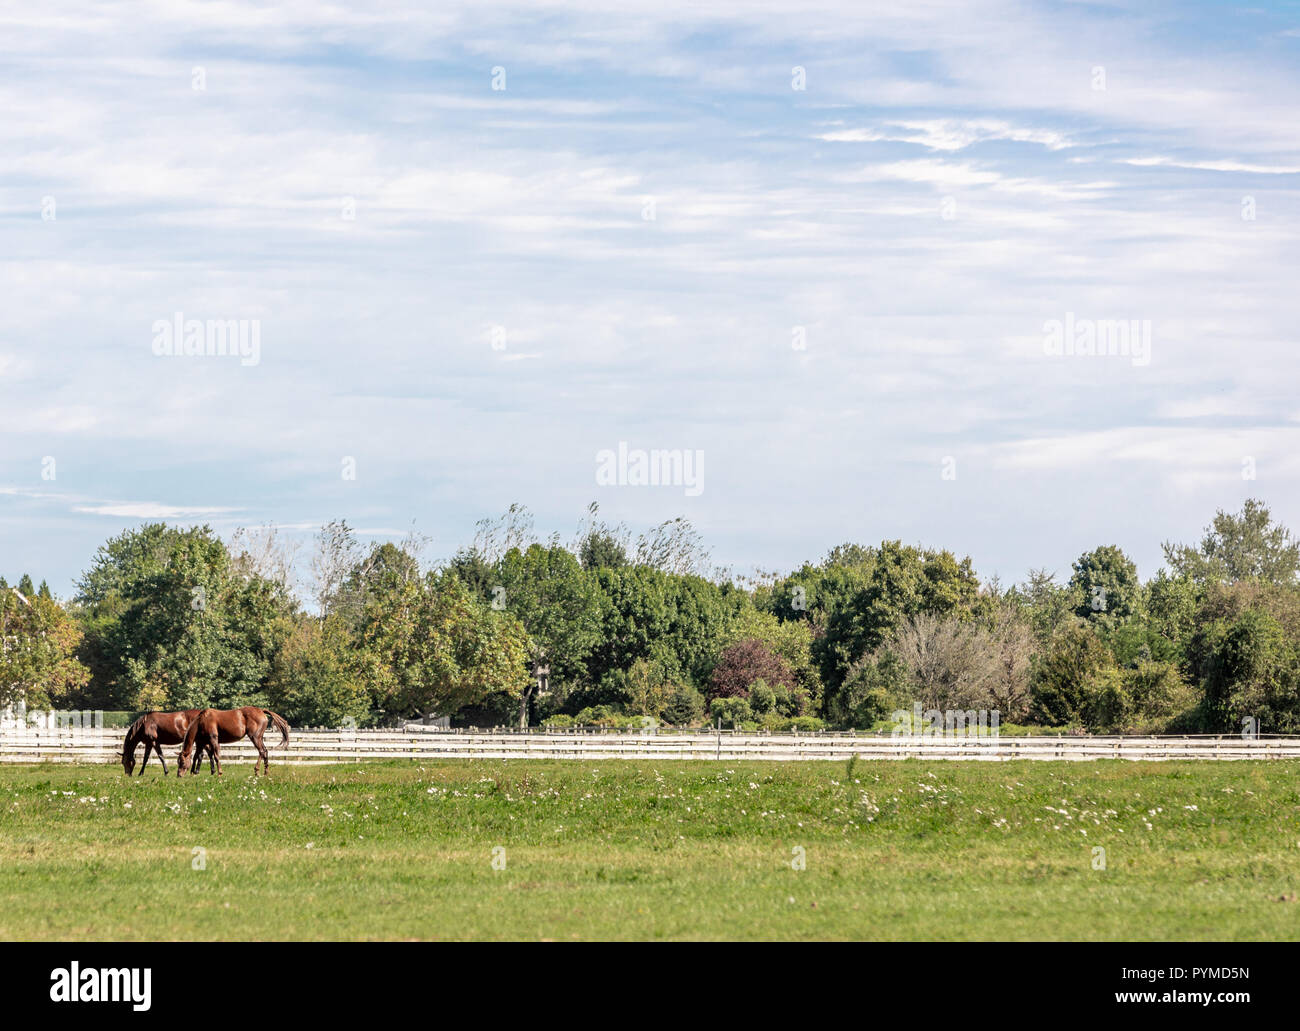 two horses in a large green field with a white fence in the background Stock Photo